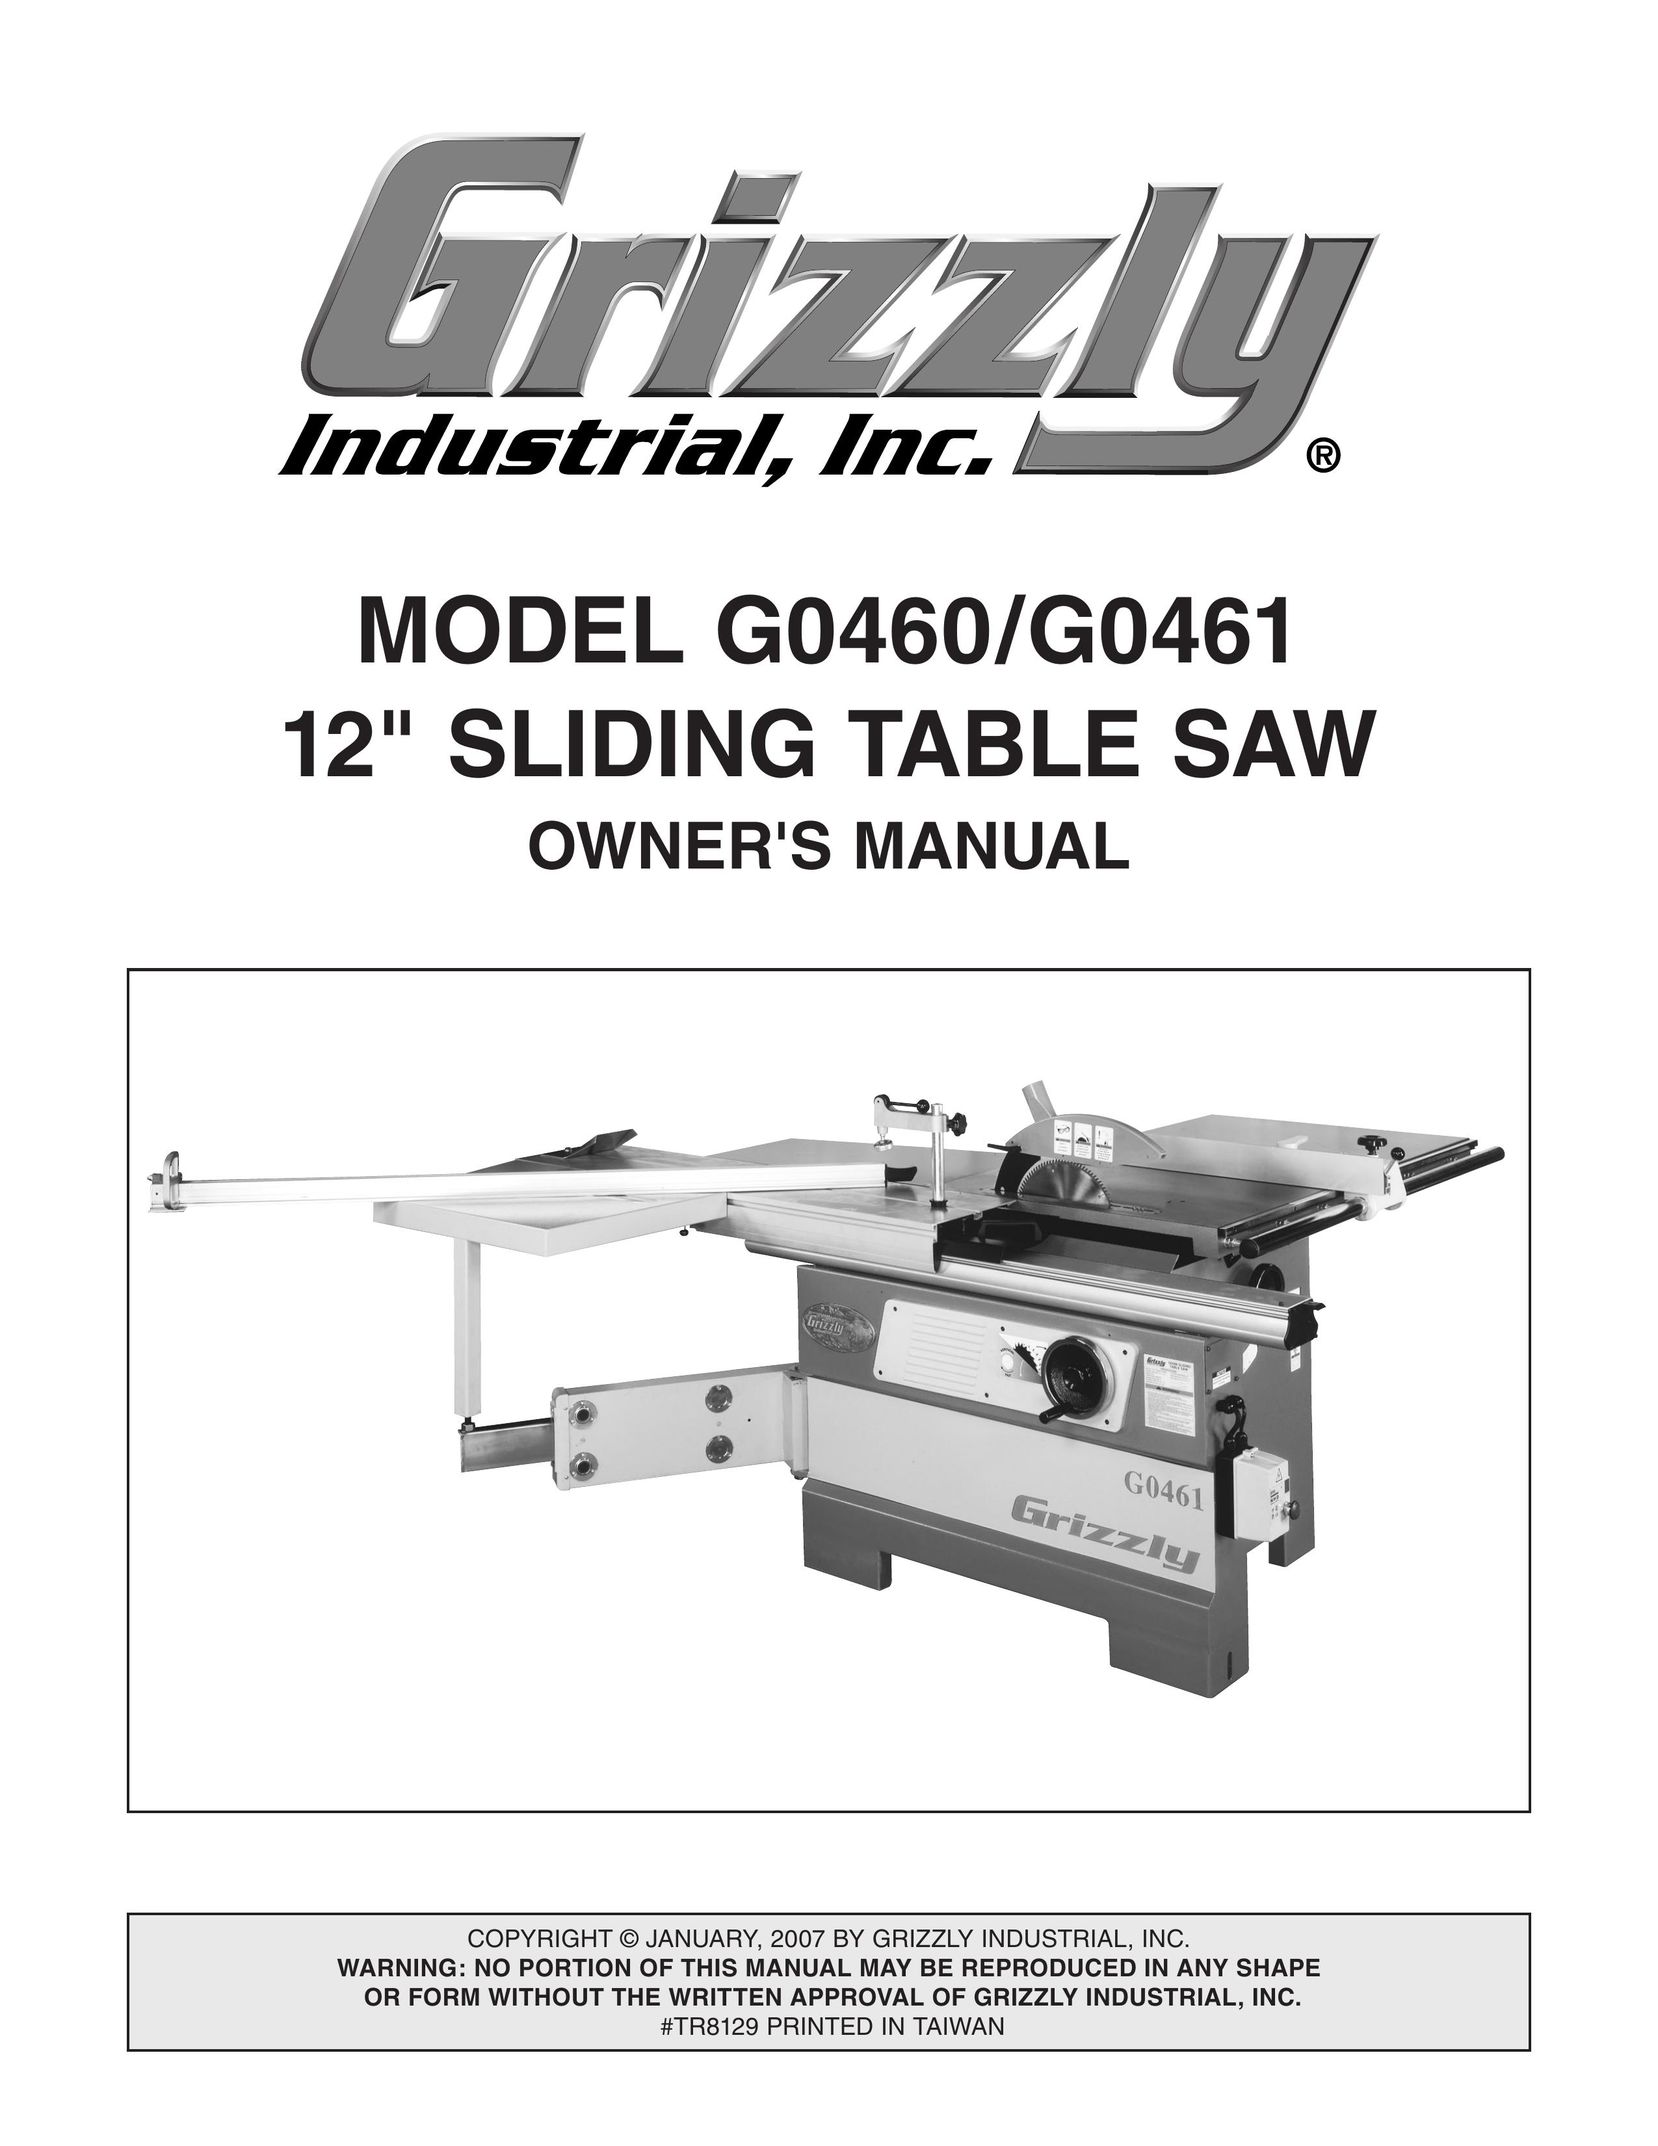 Grizzly G0460 Saw User Manual